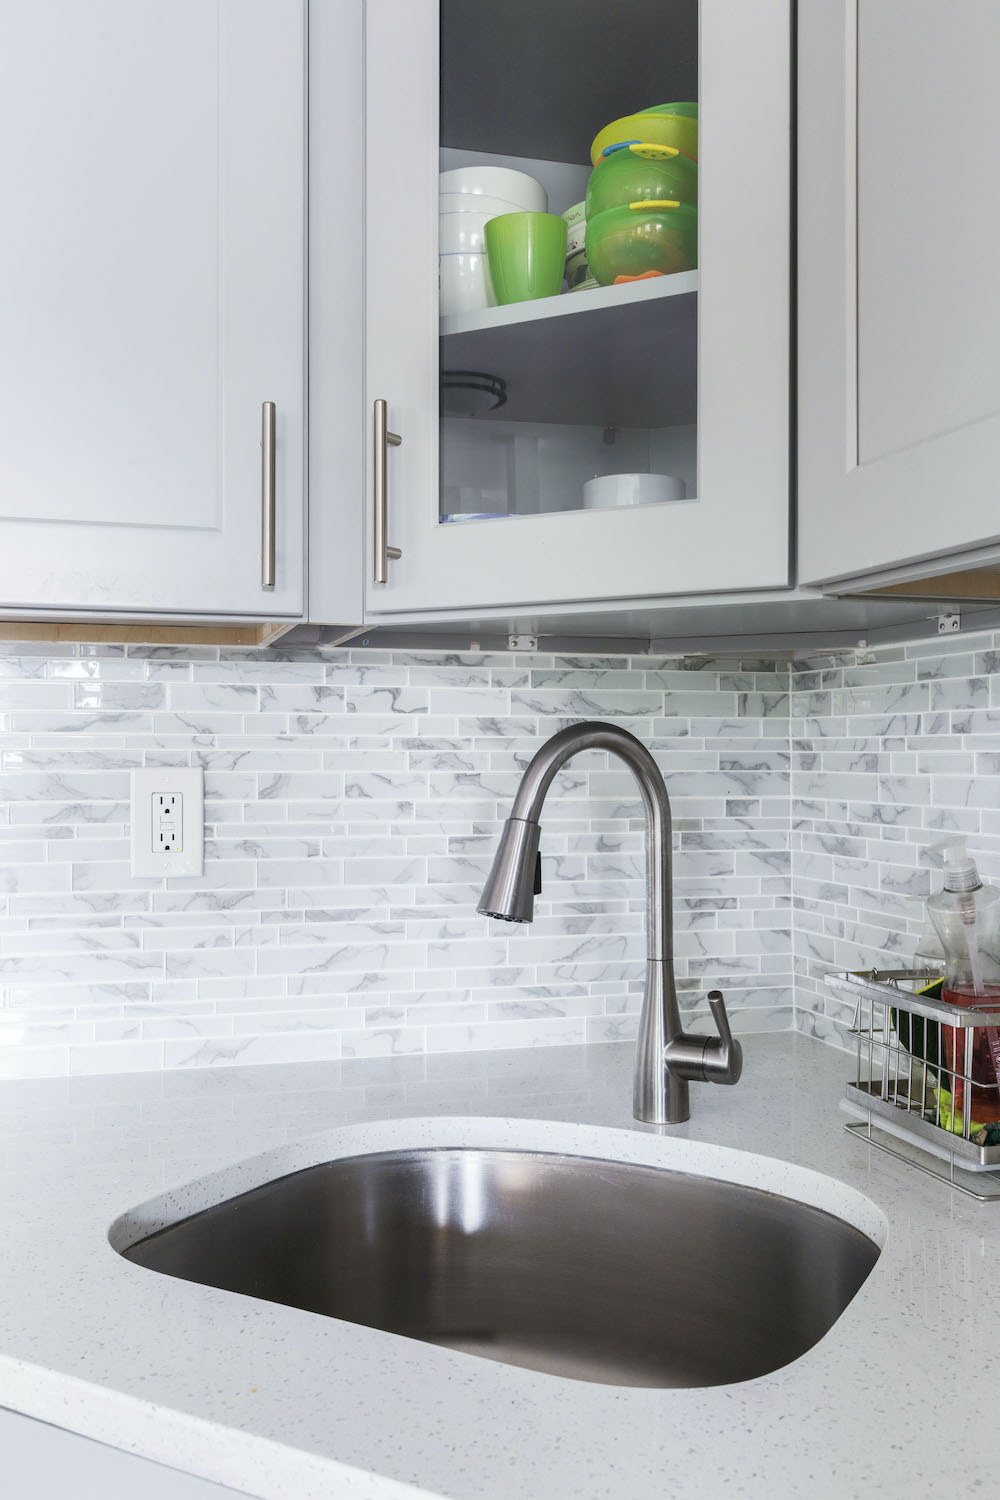 Light gray kitchen cabinets with gray countertop along a gray backsplash and small sink after renovation